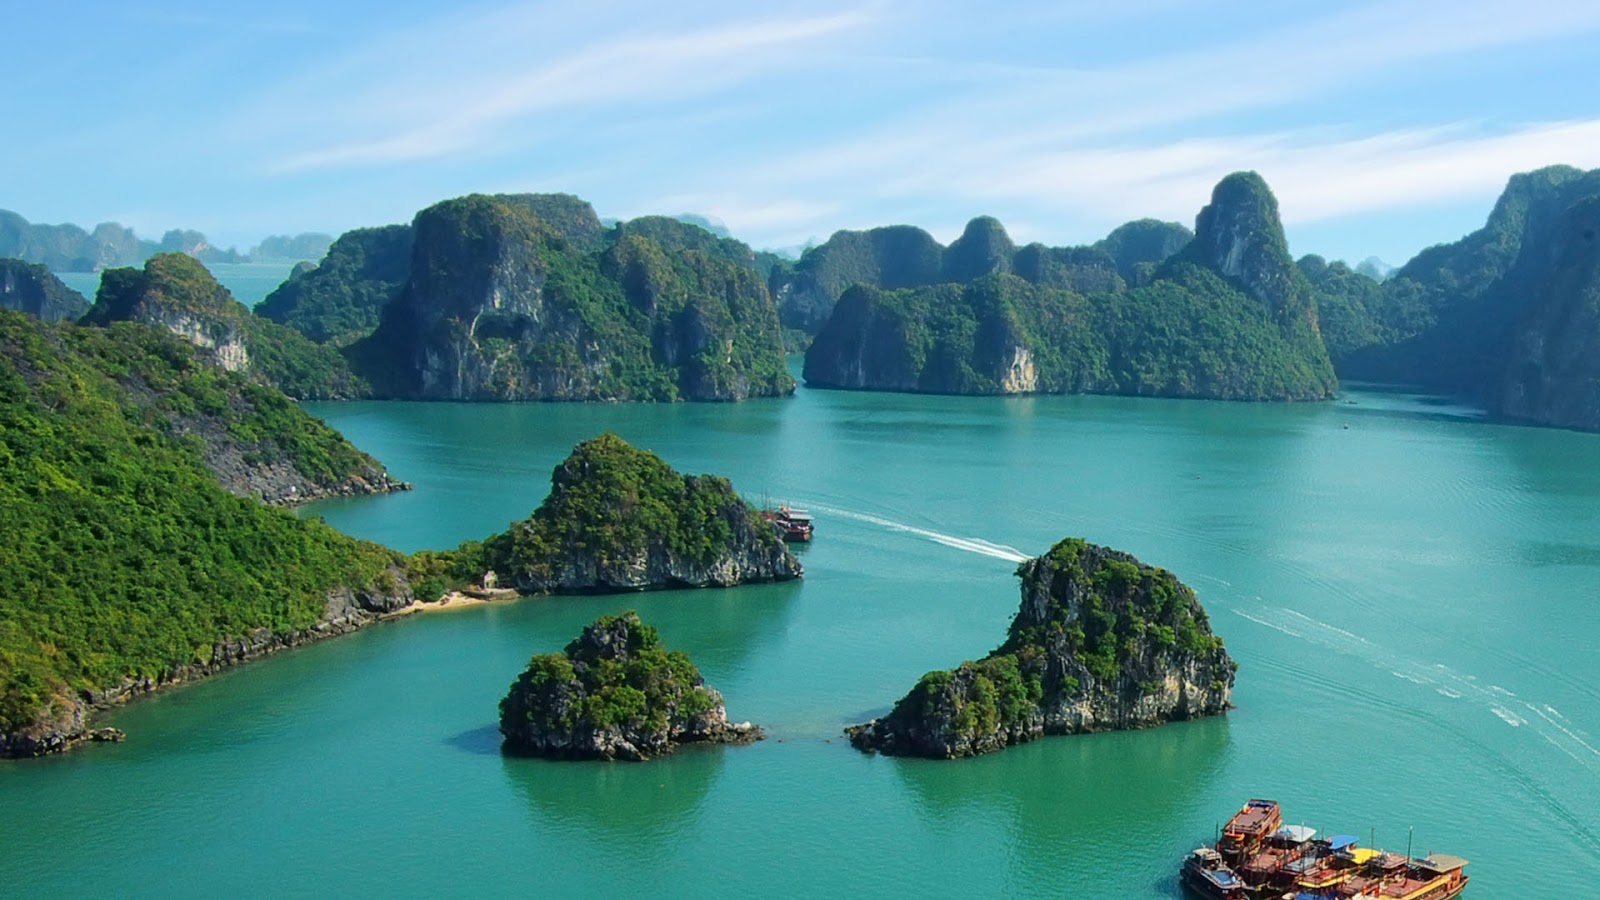 vietnam is a good place to visit: Best Places To Visit In Vietnam: Halong Bay